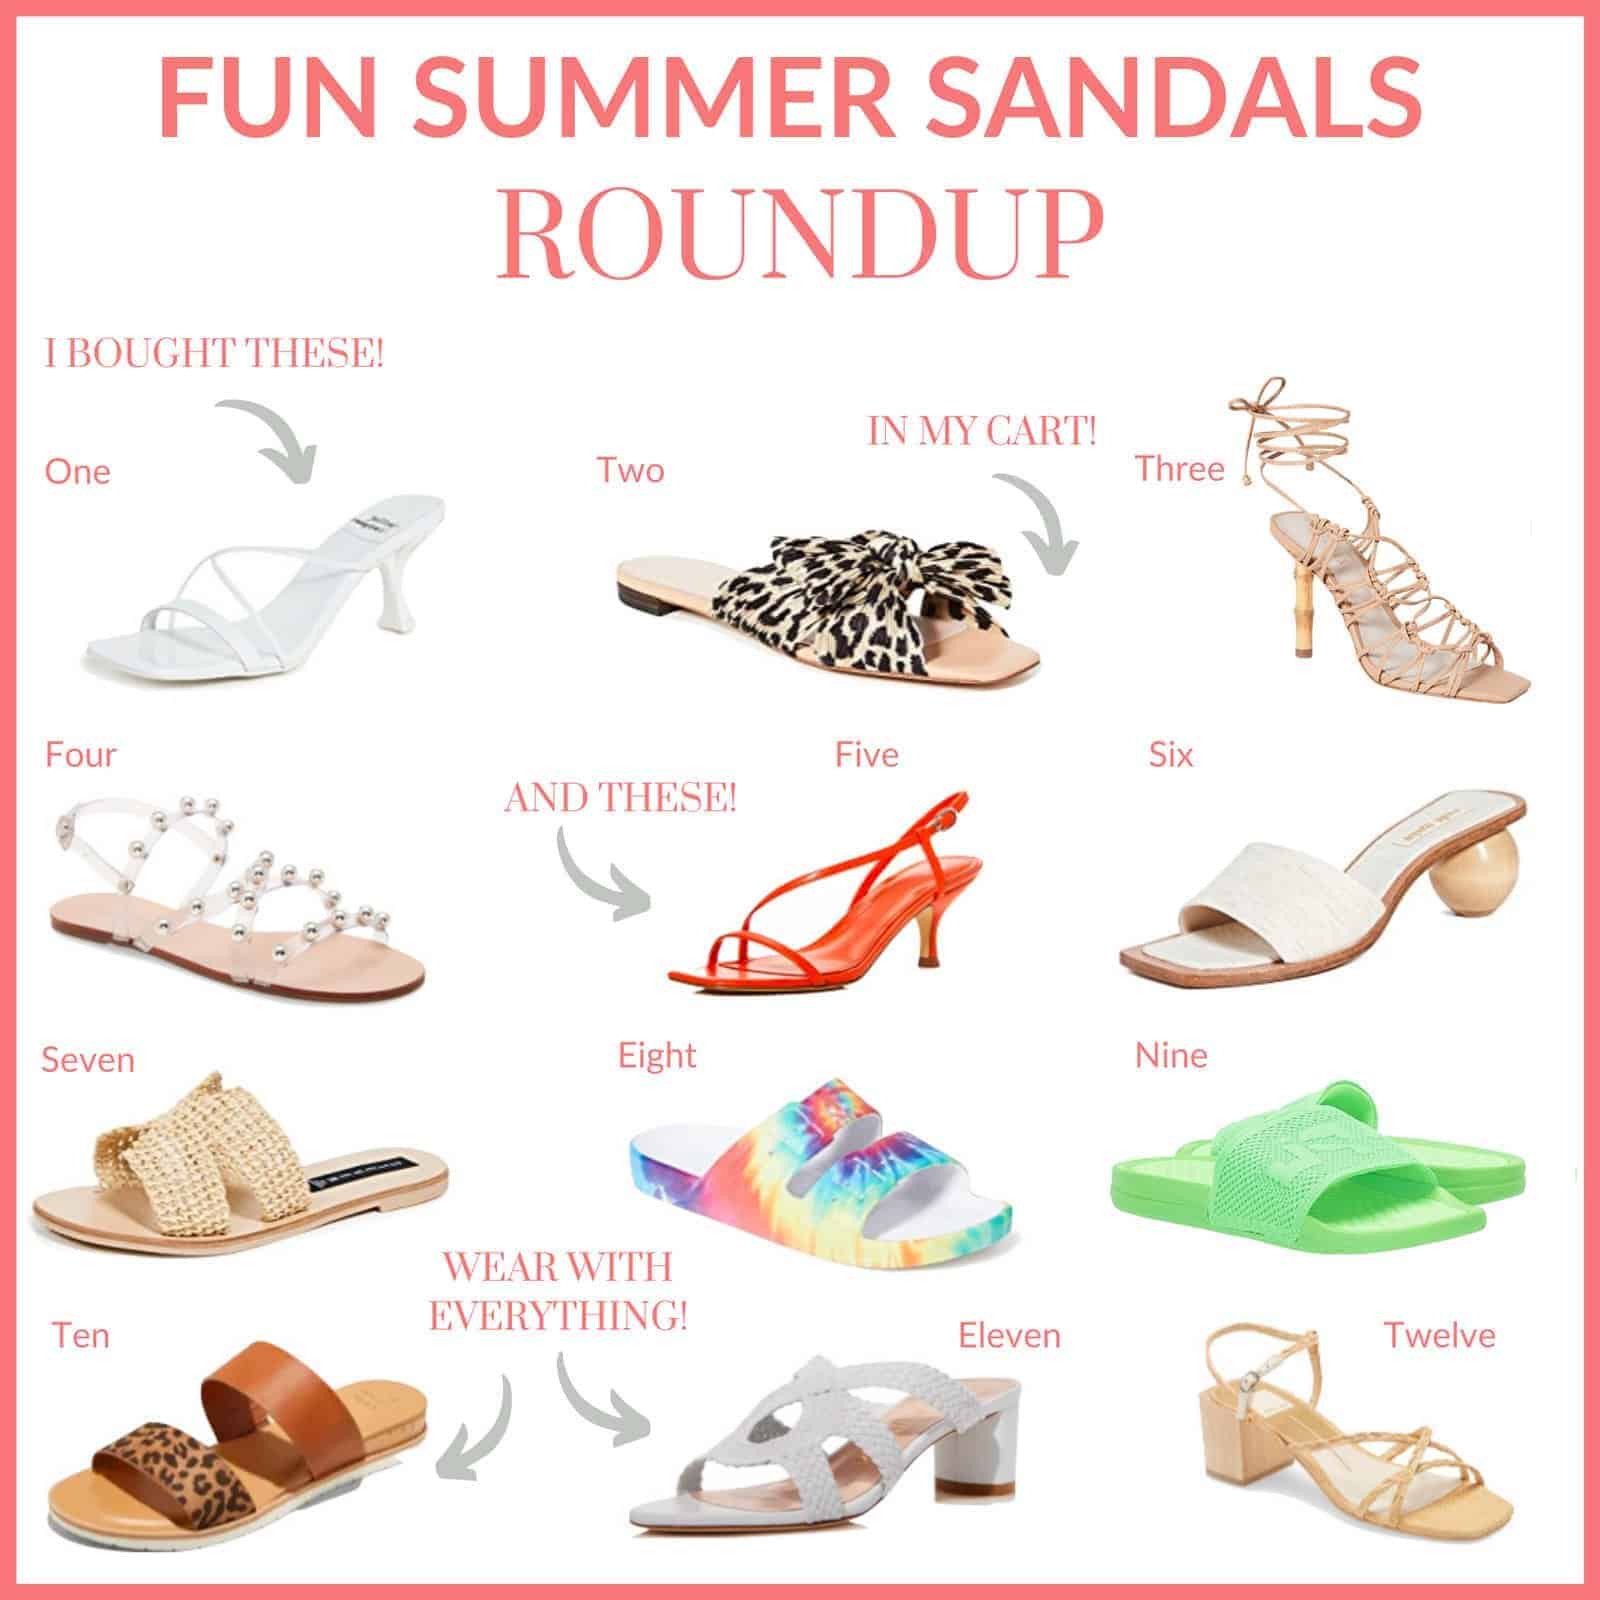 Fun summer sandals to shop now